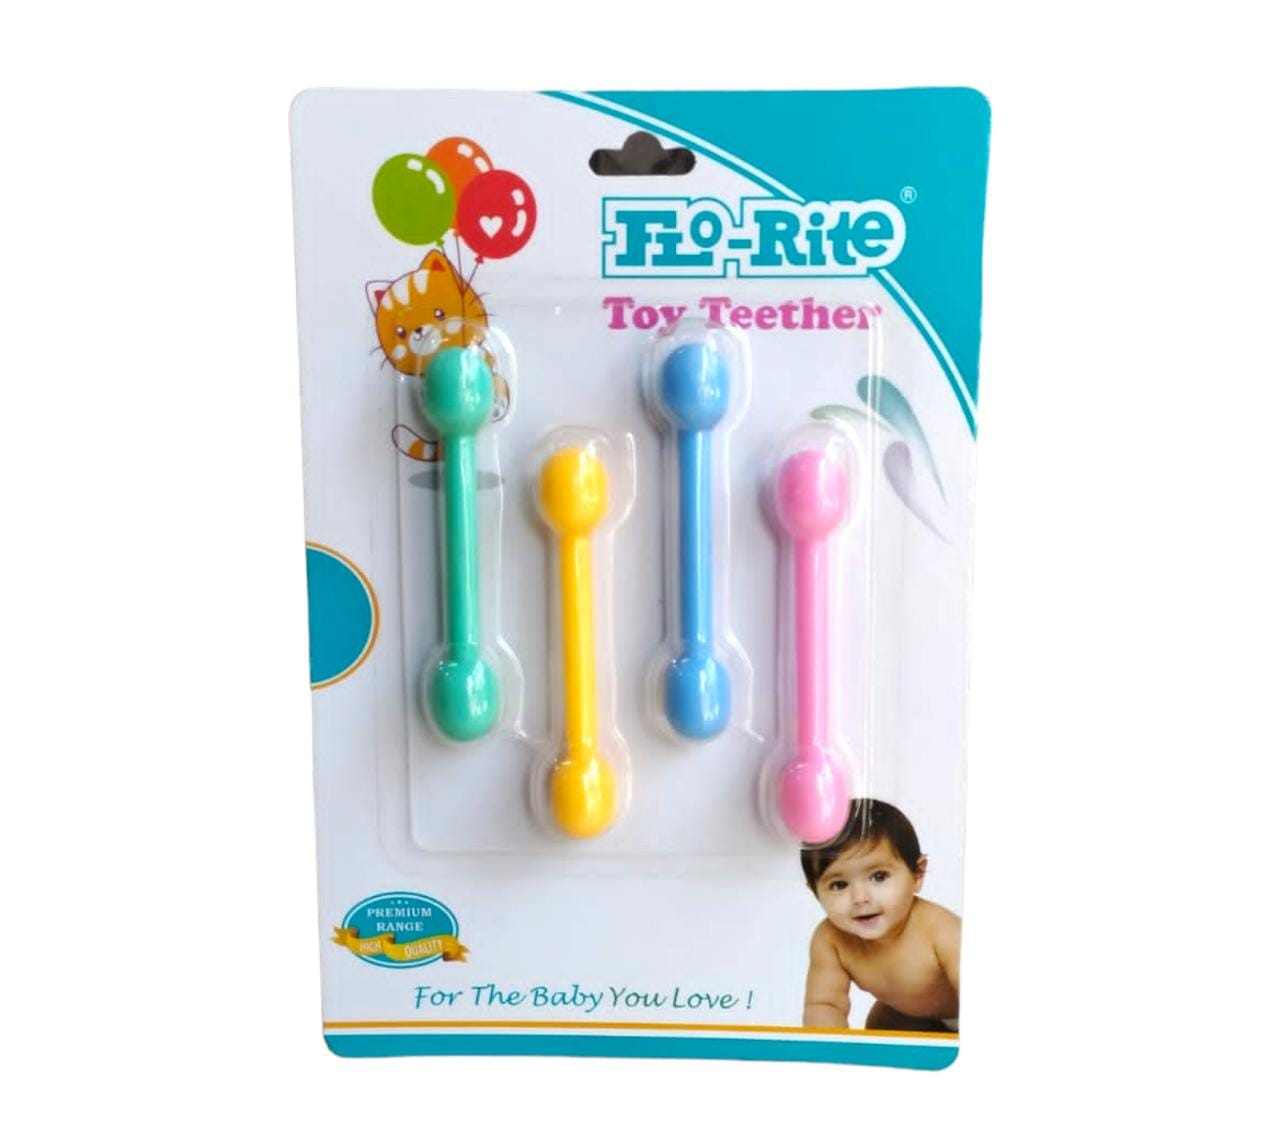 Toy teether